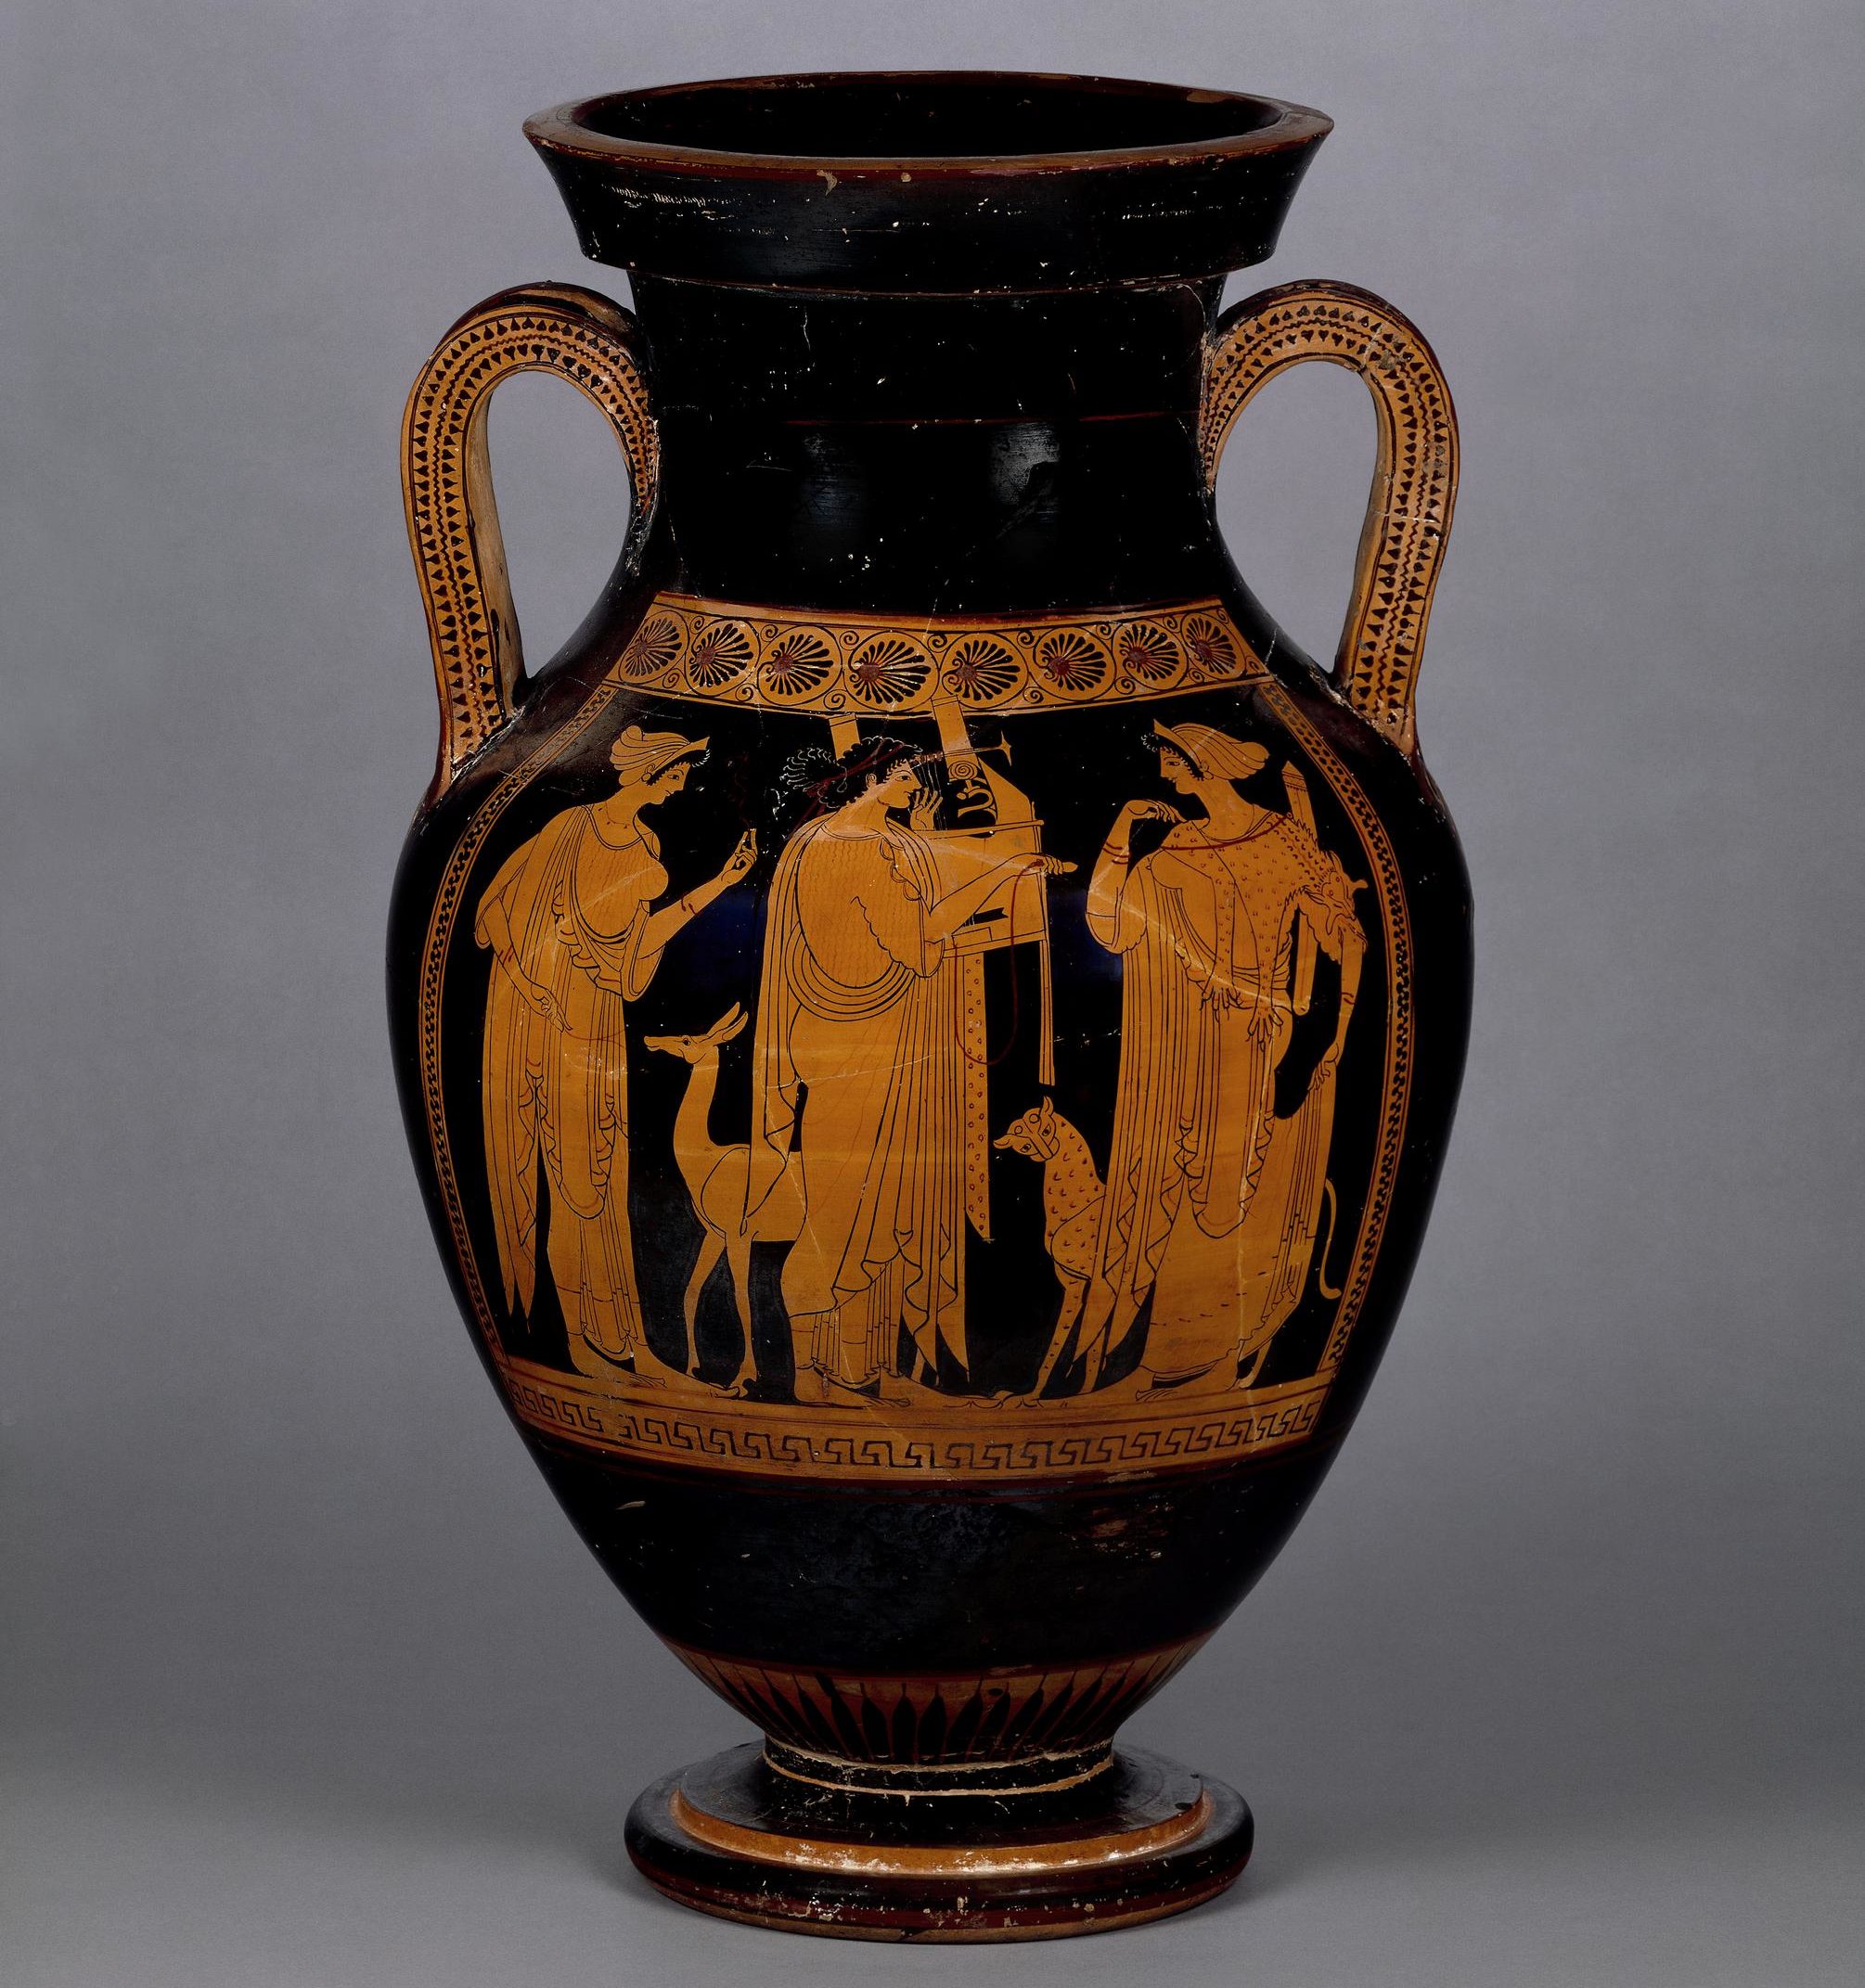 To the left stands Leto holding a flower, dressed in chiton and himation. At her feet is a deer. In the centre stands Apollo, playing a cithara and similarly dressed. On the right stands Artemis with a panther at her feet. She is wearing animal skins and much jewelry.